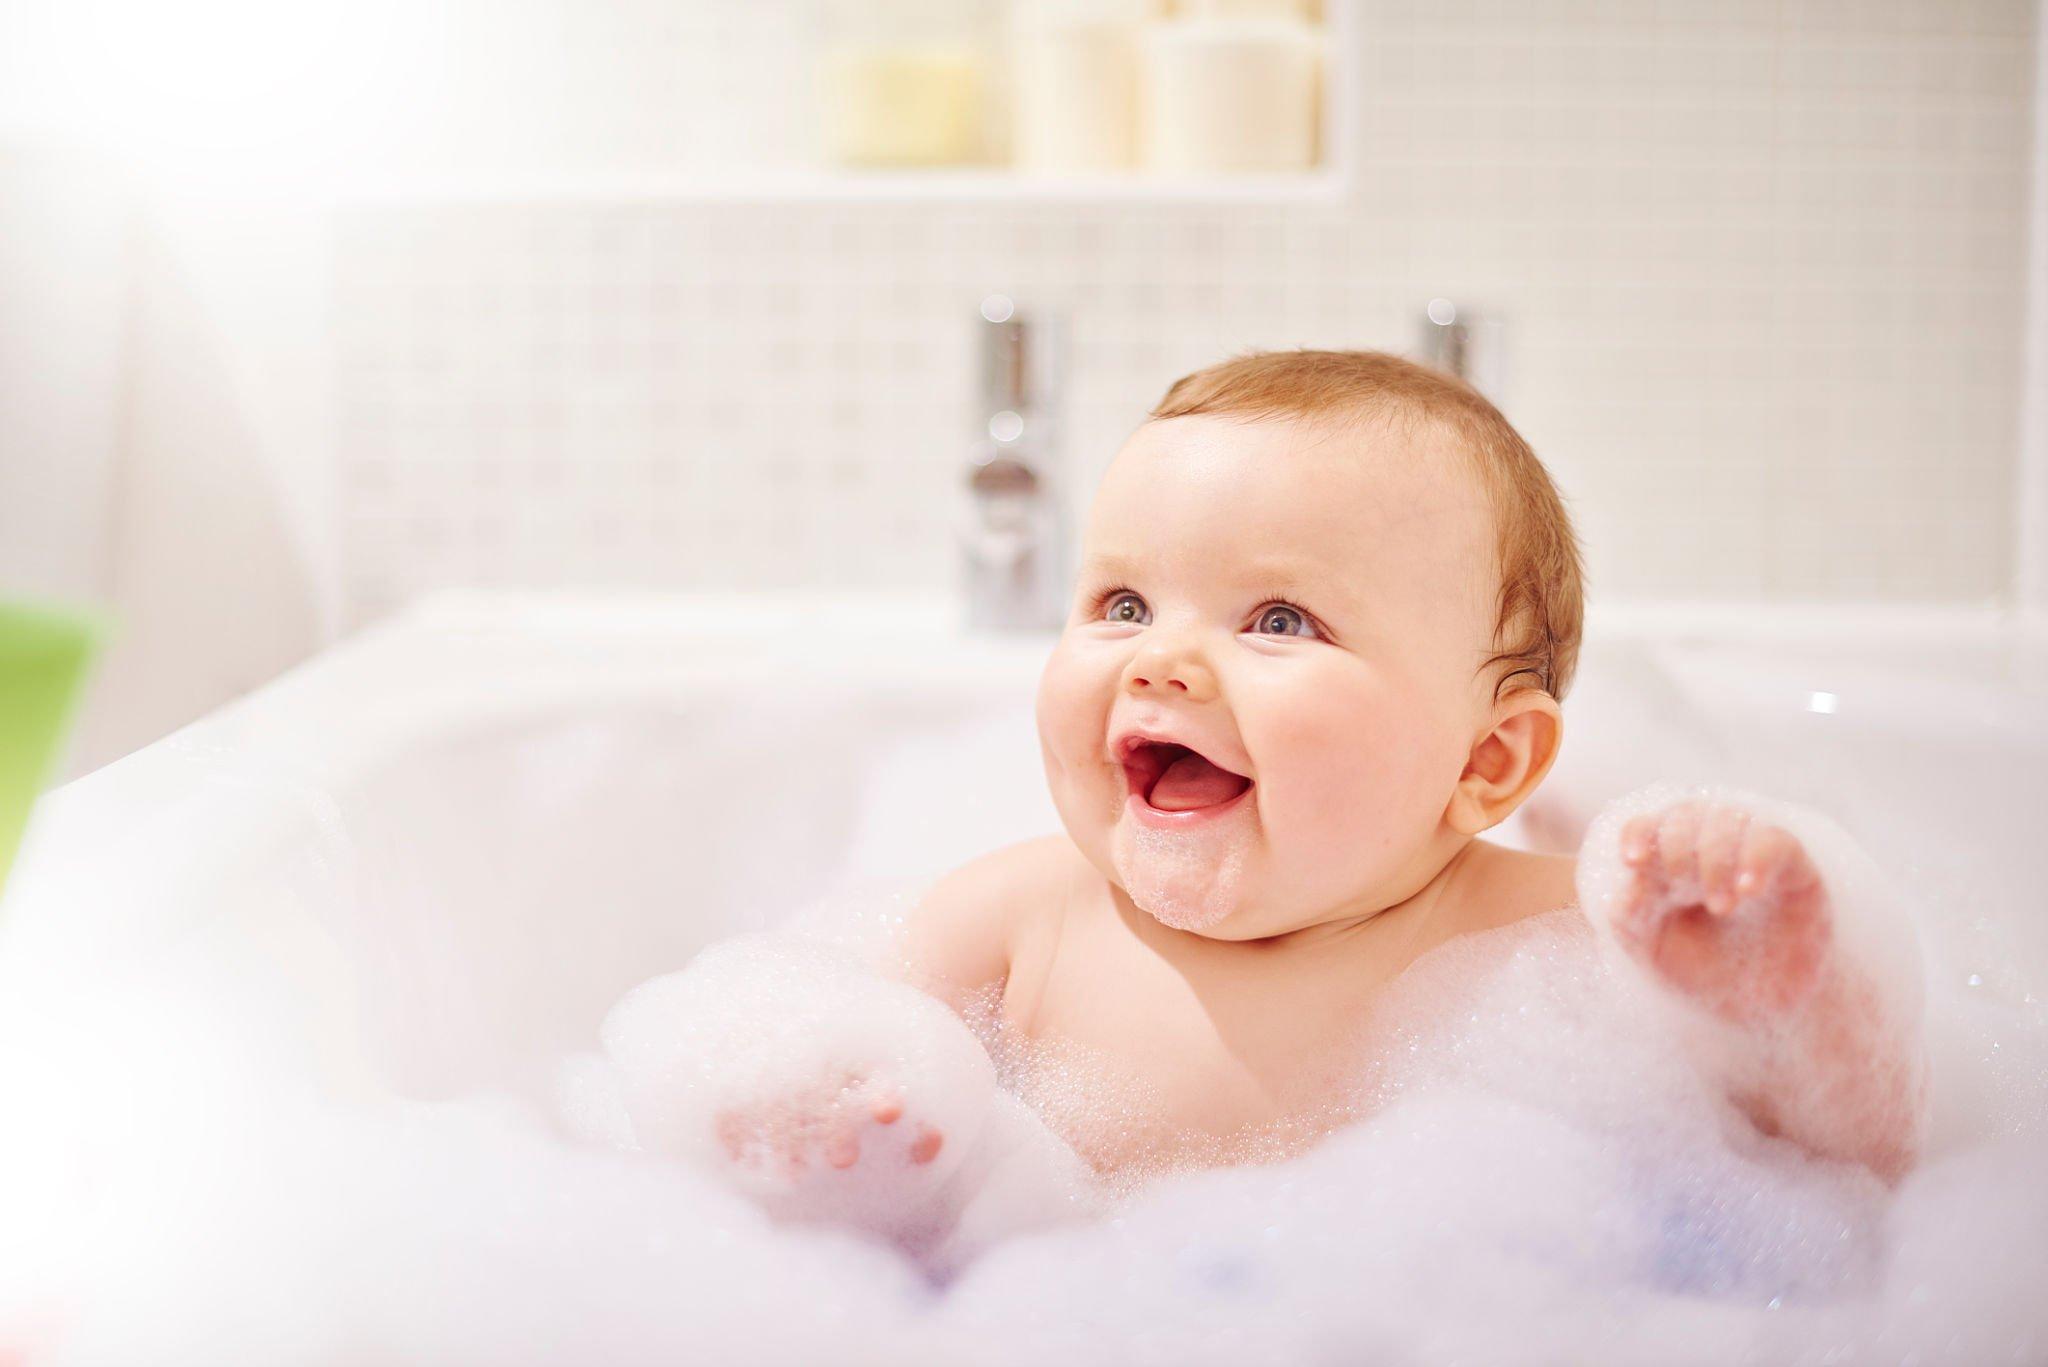 Baby Bath Accessories: To Buy or Not to Buy